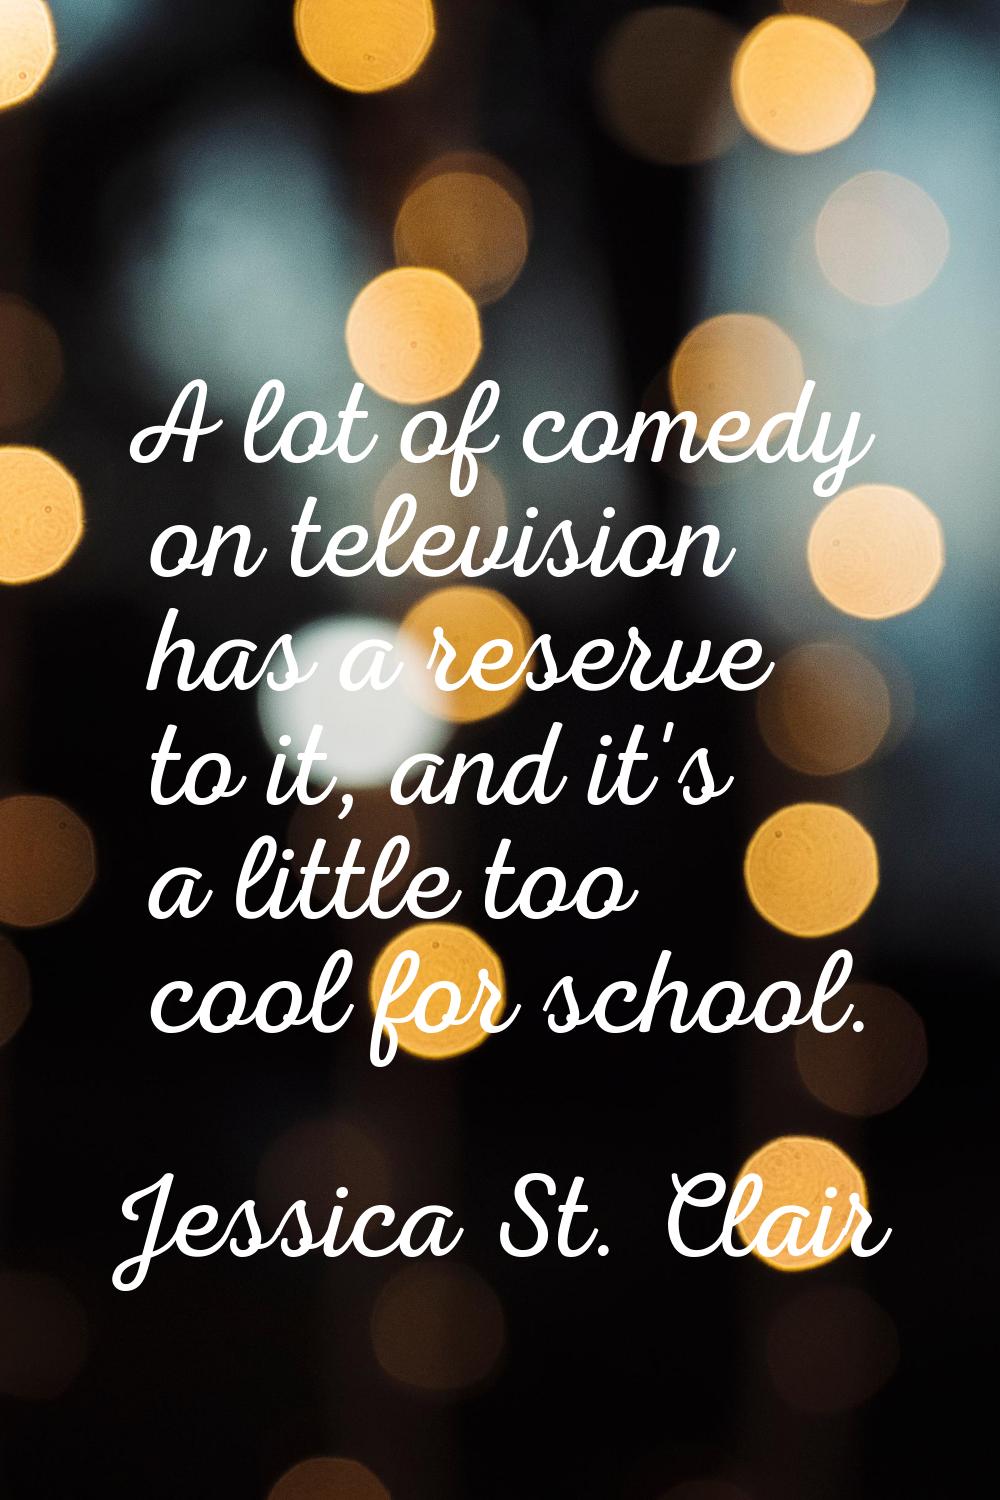 A lot of comedy on television has a reserve to it, and it's a little too cool for school.